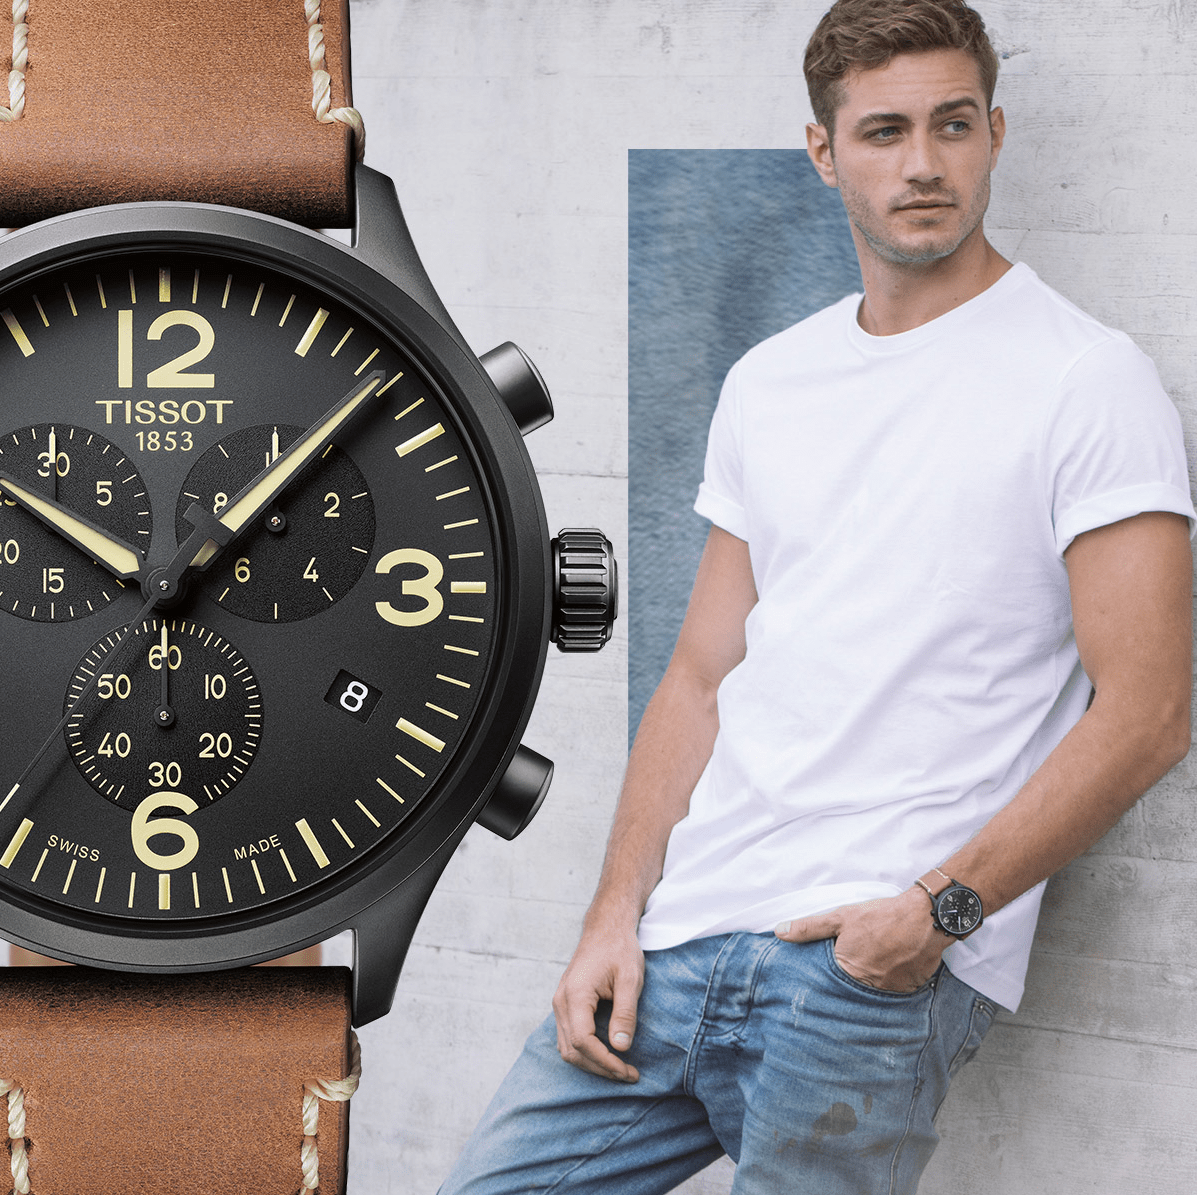 Swiss made at an unbeatable price! The Tissot Chrono XL Collection features a large case with a diameter of
45 mm.

#tissotchronoxlcollection #fordsjewelers #fordsnewjersey #fordsnj #njjeweler #njewelers #newjerseyjeweler #newjerseyjewelry #fordsjewelersnj #localjewelry